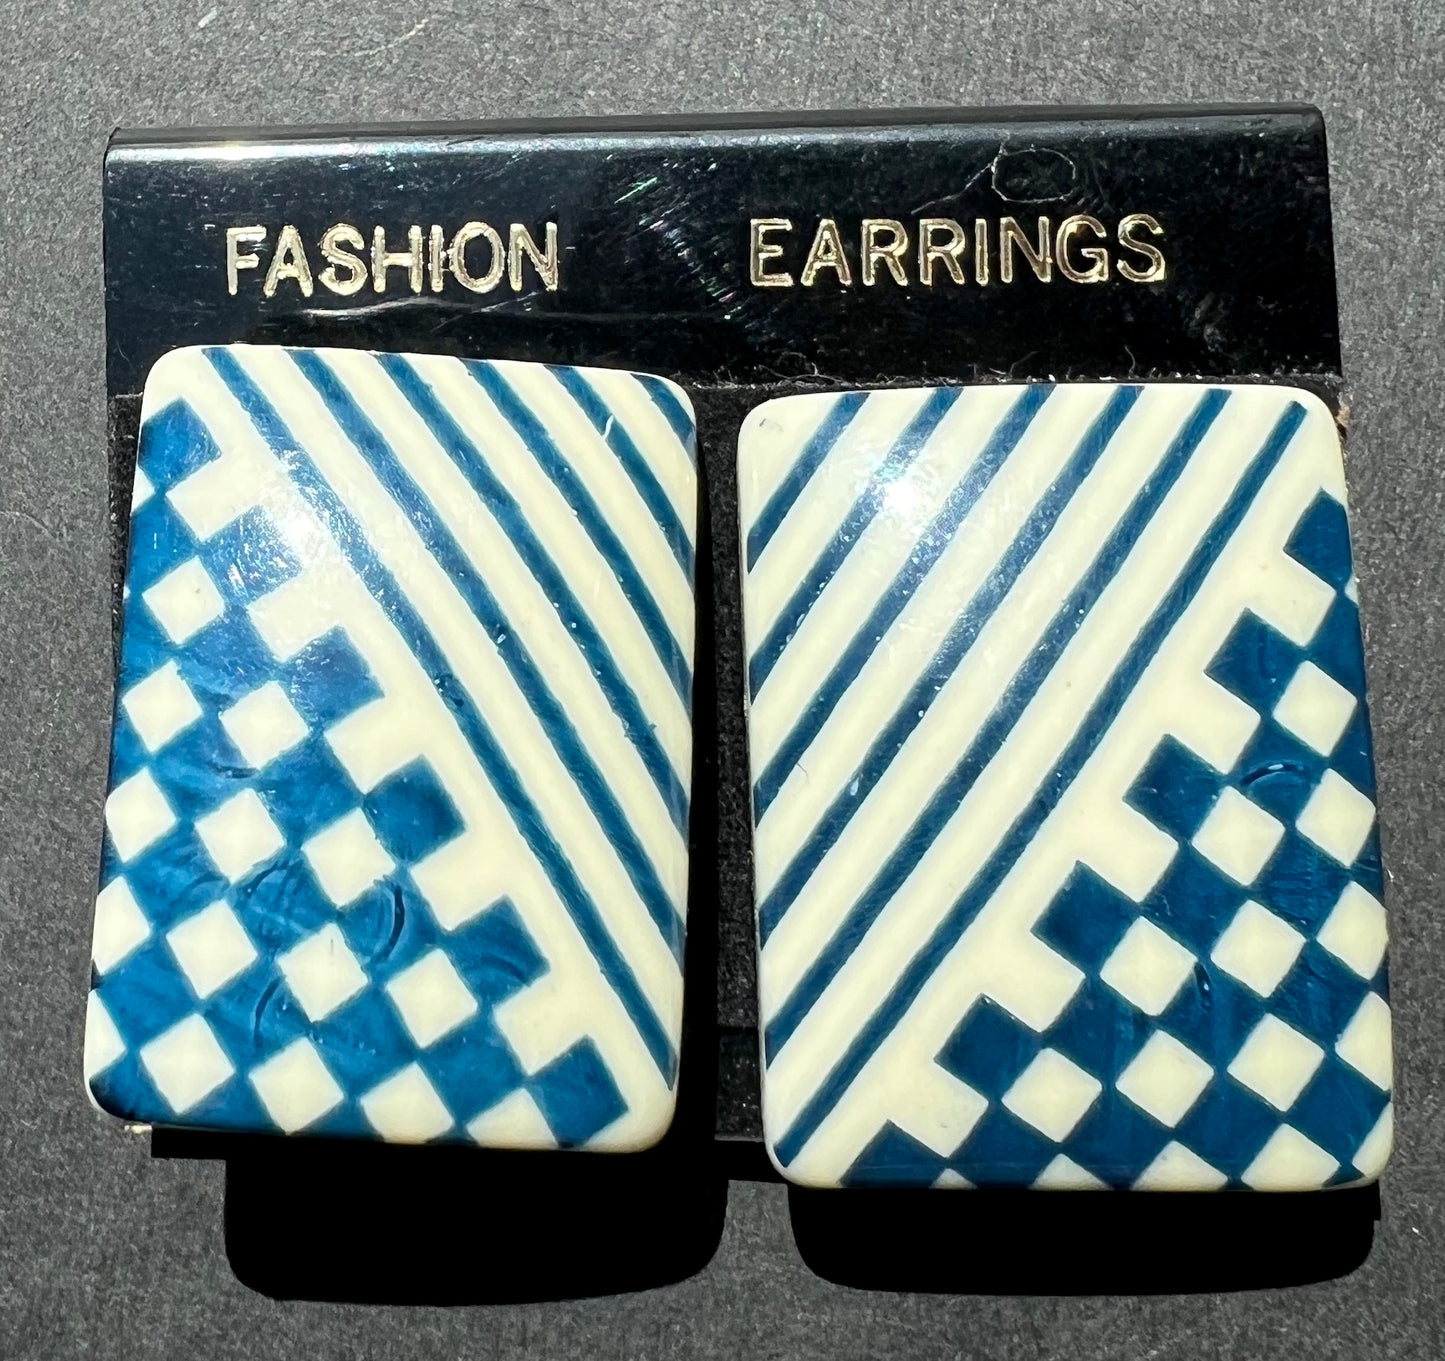 Big 1980s Two Tone Clip On Earrings